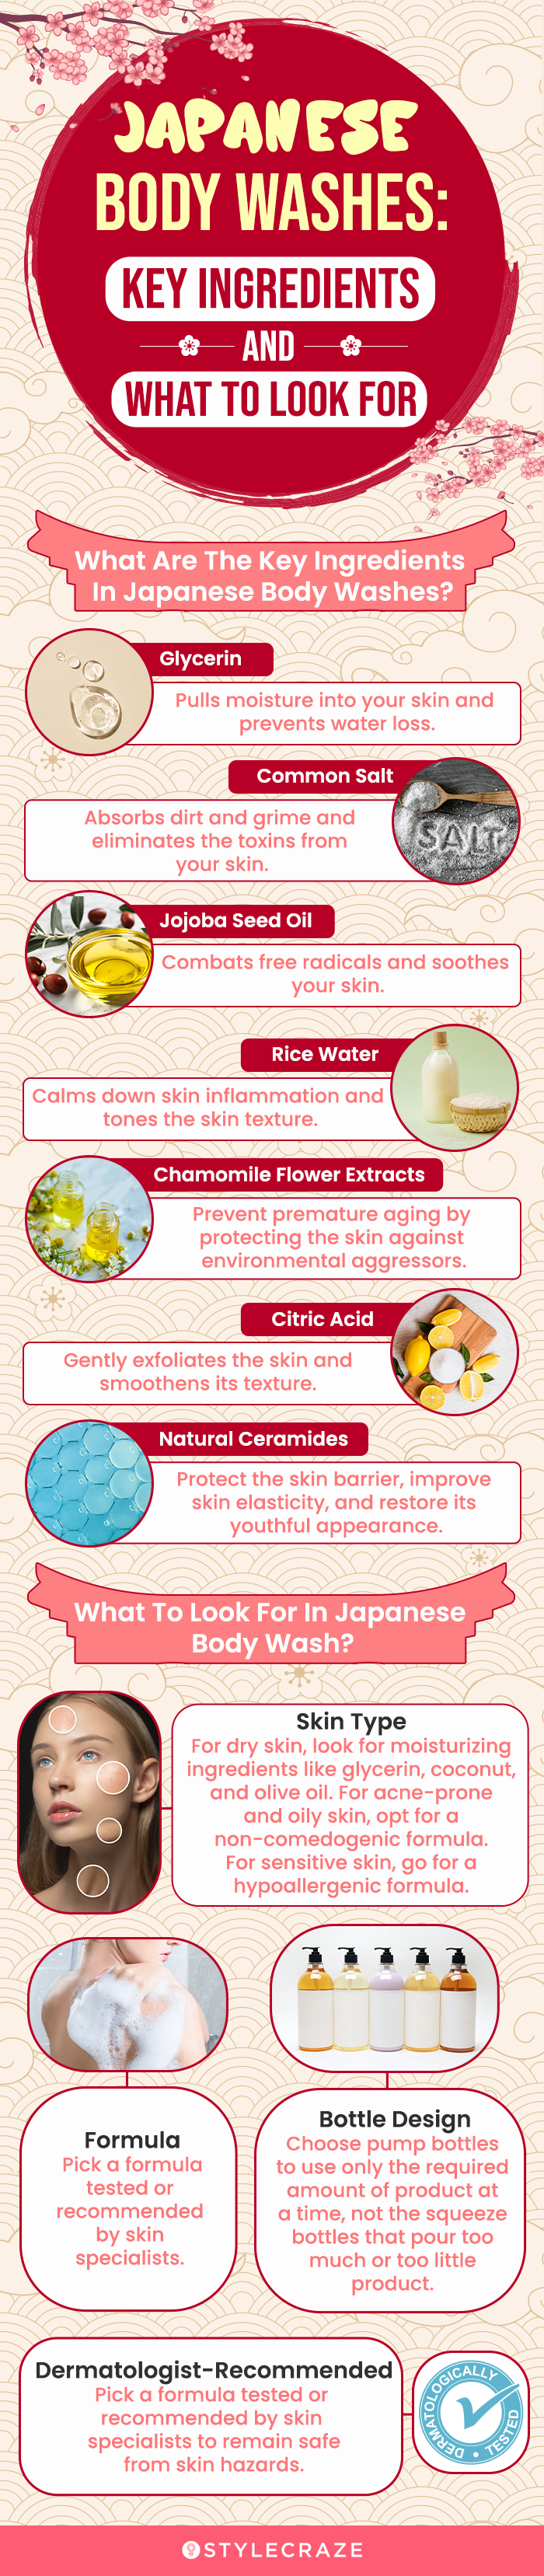 Japanese Body Washes: What To Look For